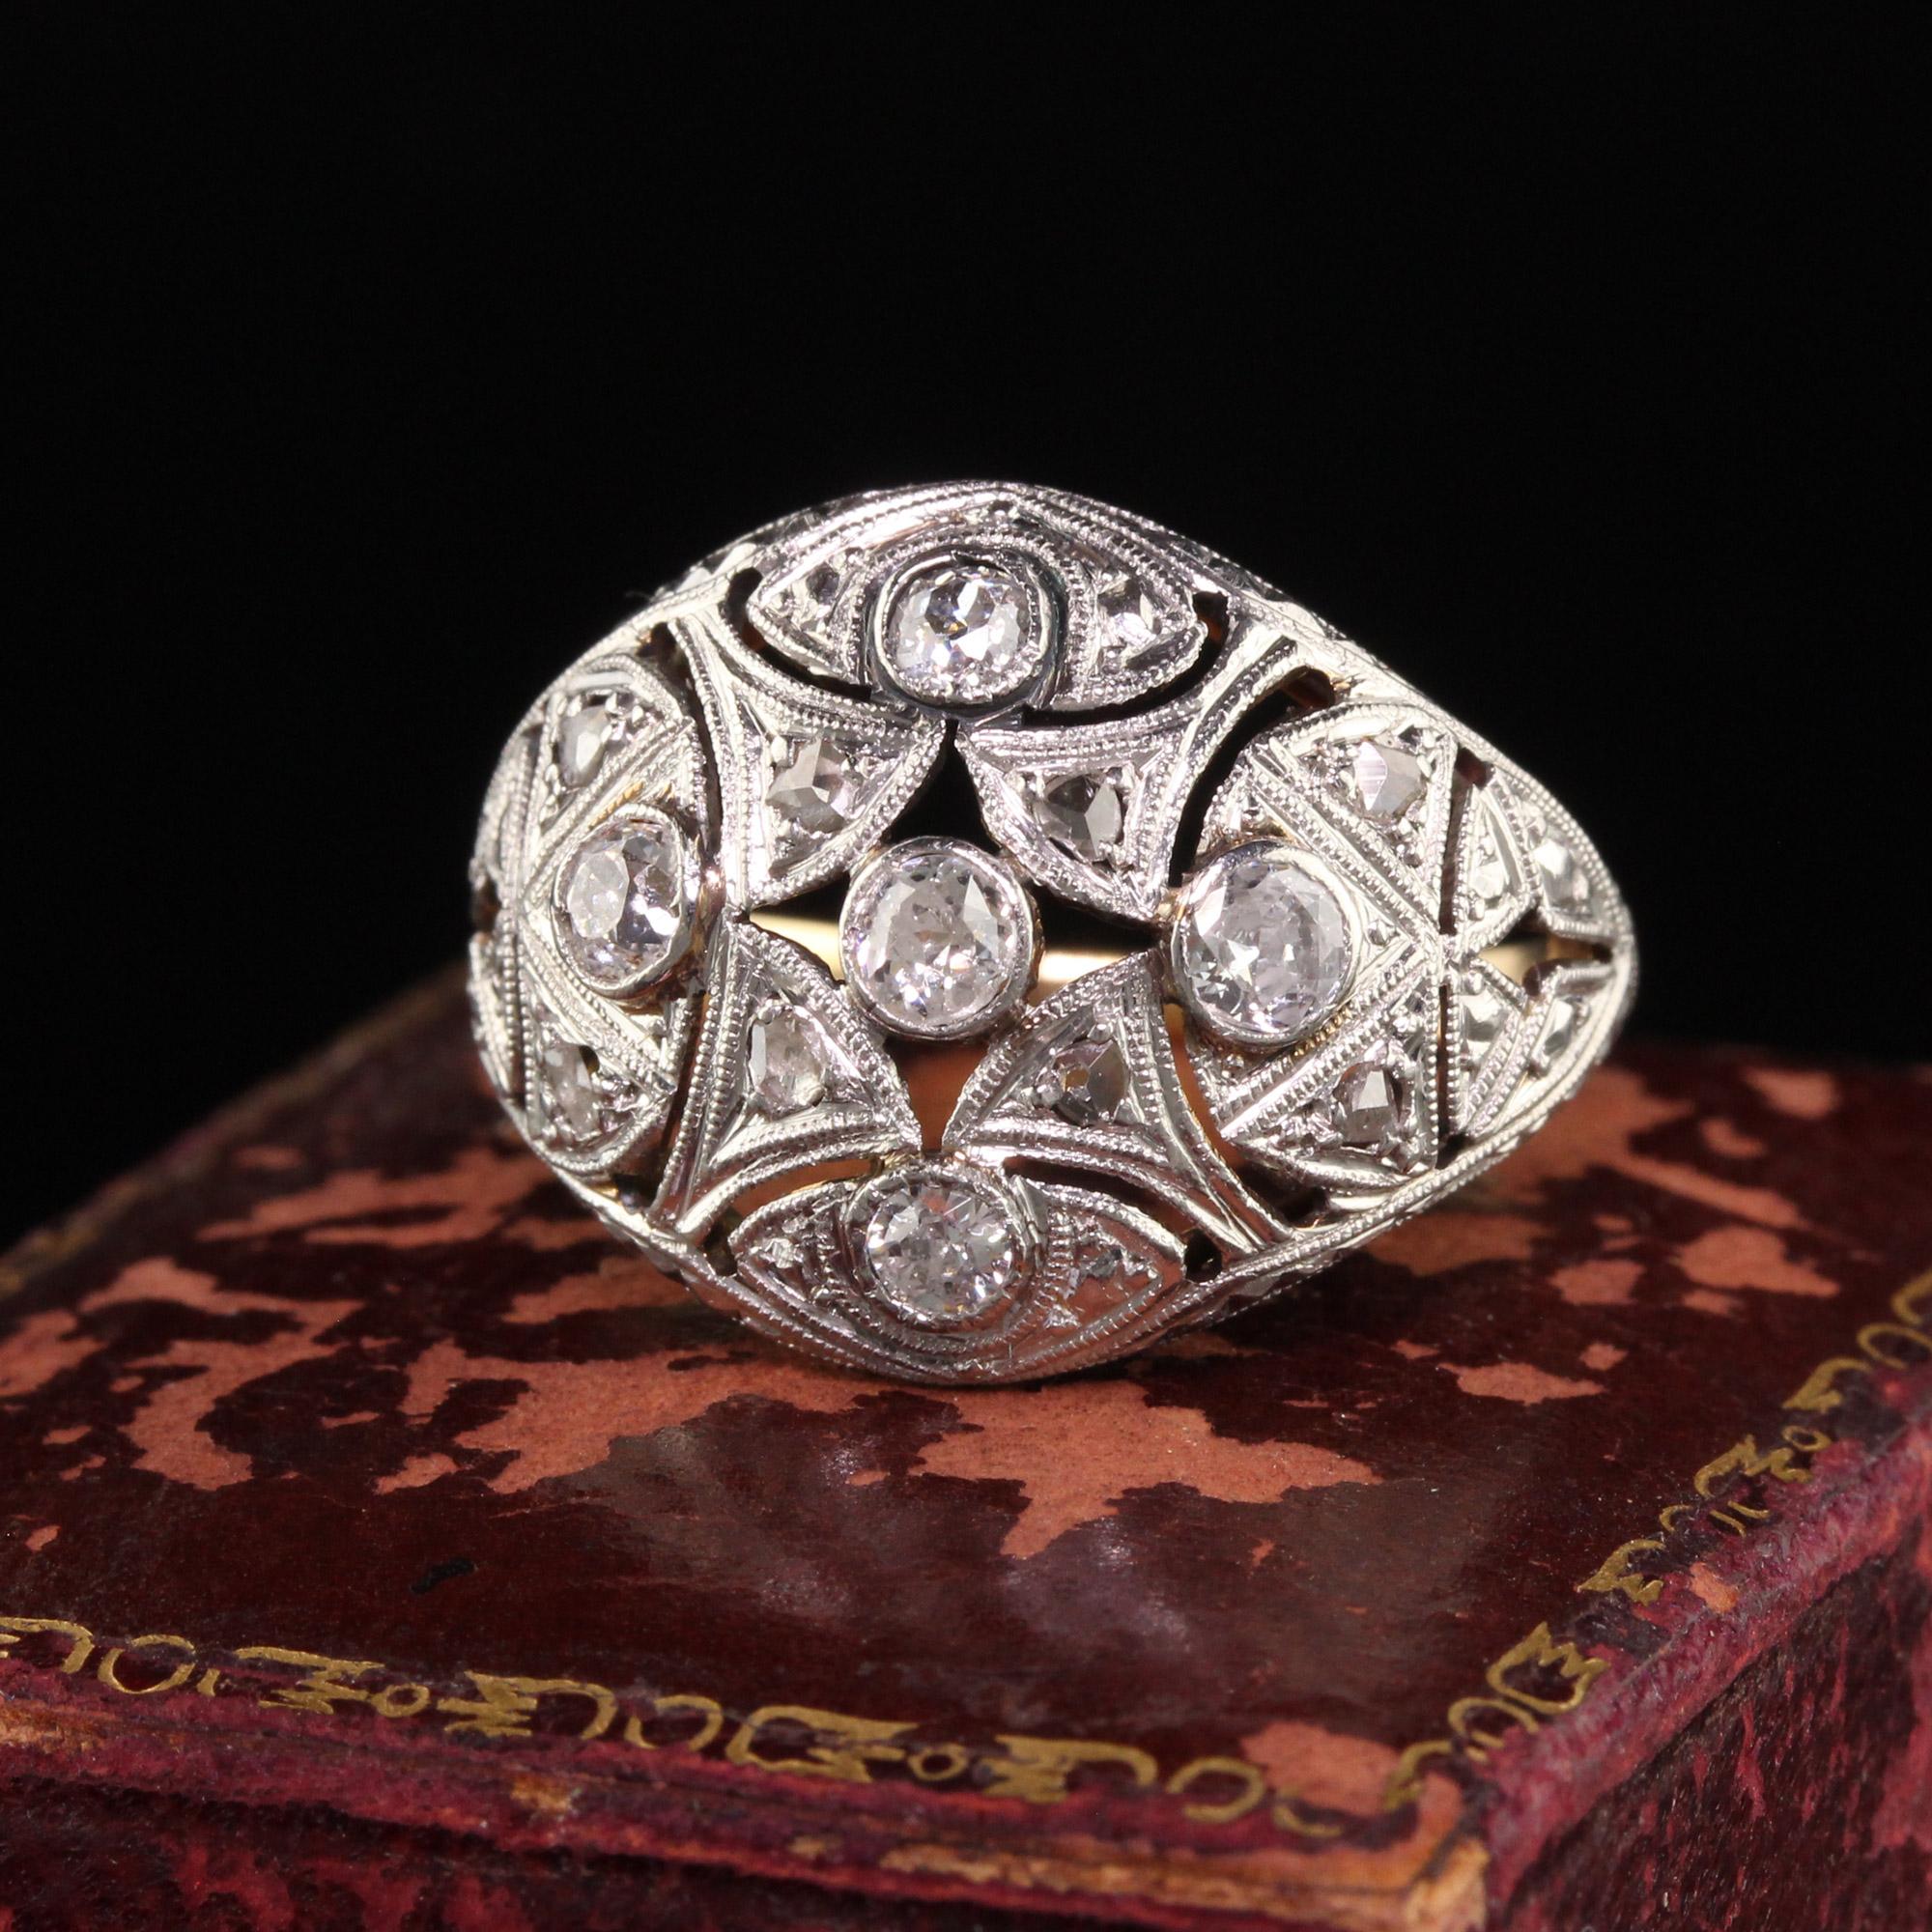 Beautiful Antique Edwardian 18K Yellow Gold Platinum Top Old European Diamond Ring. This beautiful ring is crafted in 18k yellow gold and platinum top. There are old european cut and rose cut diamonds set on top of the mounting and it is in great